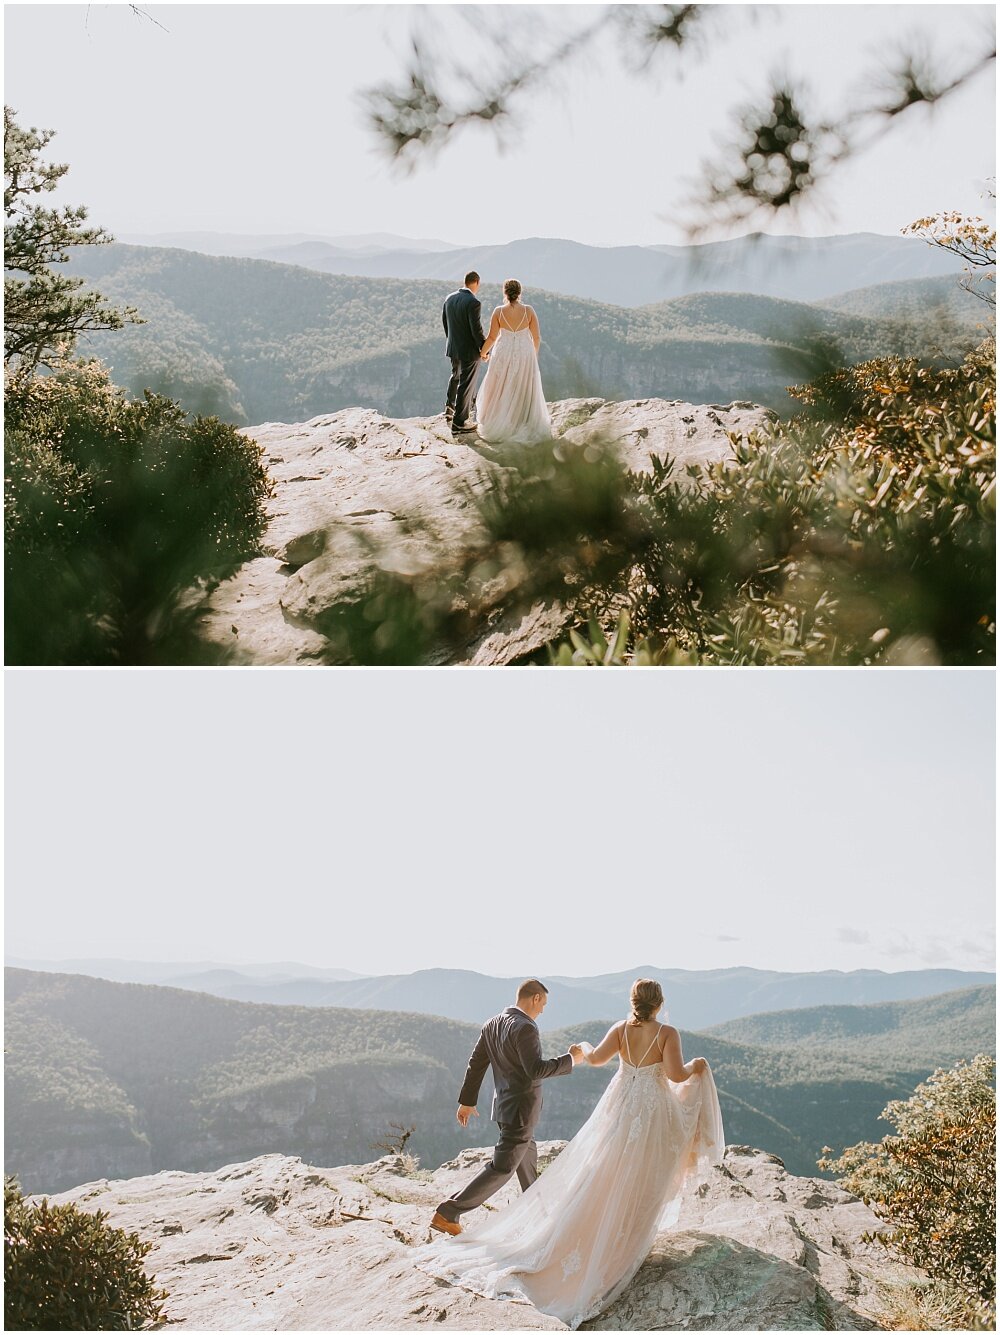 Bride and groom walking along the mountain.